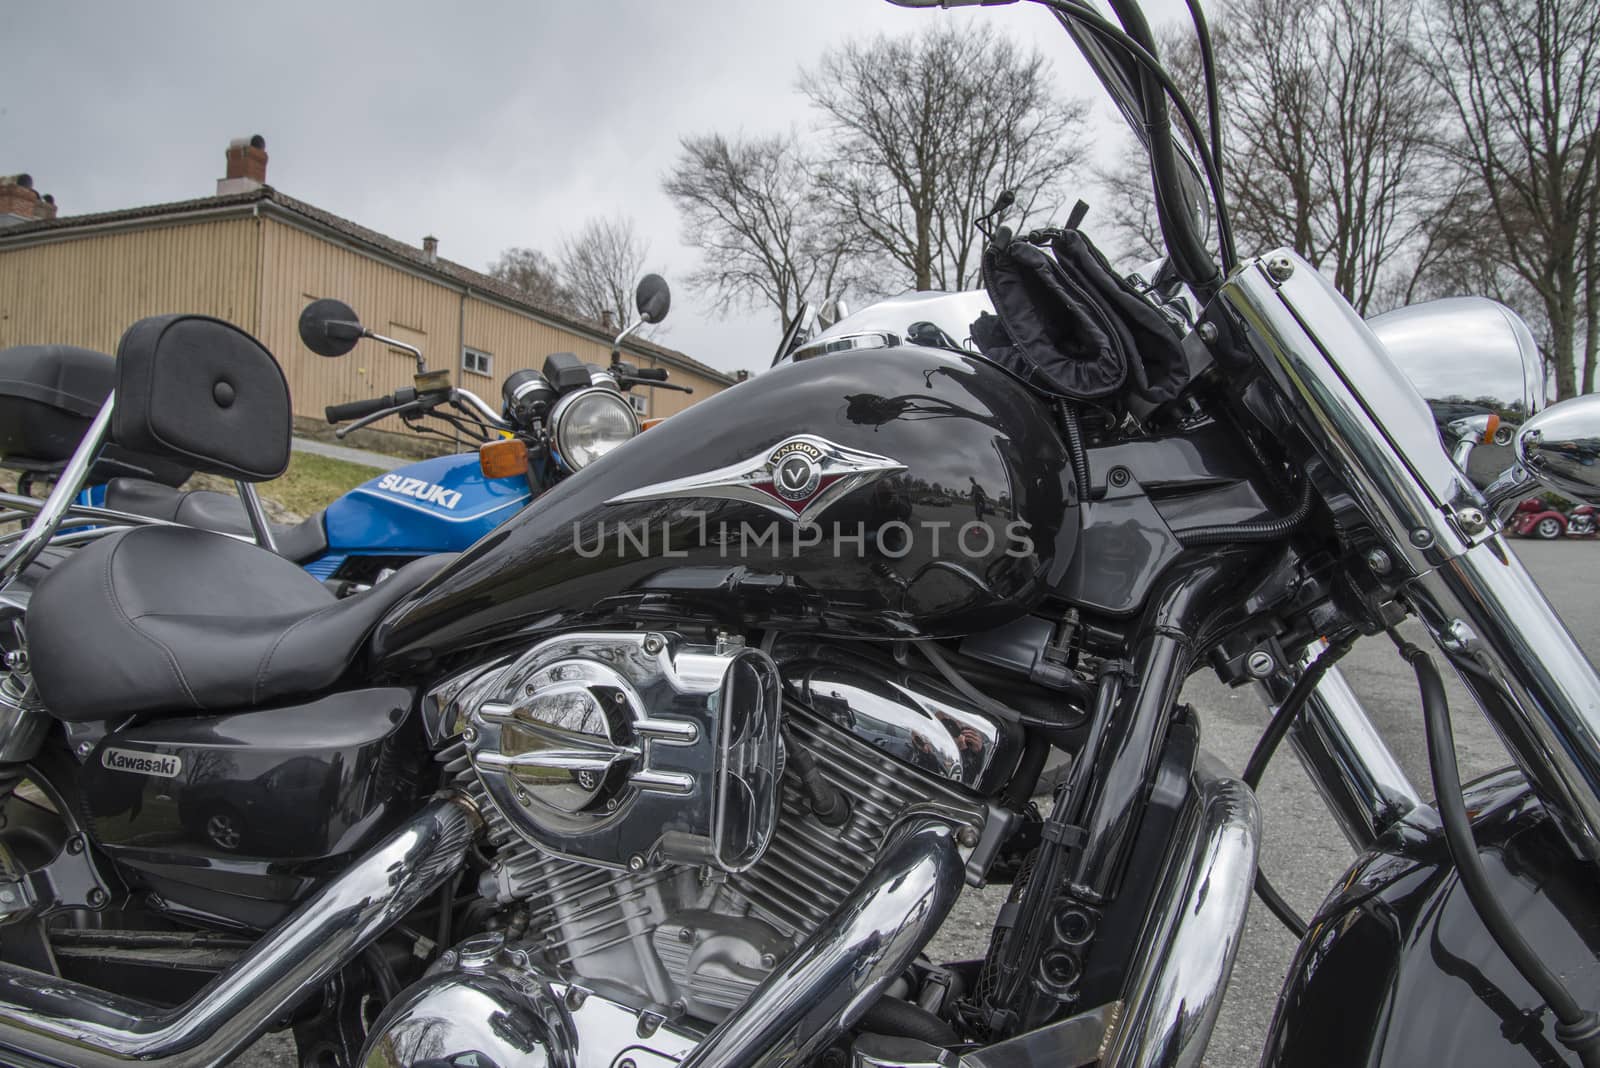 Every year in May there is a motorcycle meeting at Fredriksten fortress in Halden, Norway. In this photo Kawasaki VN 1600